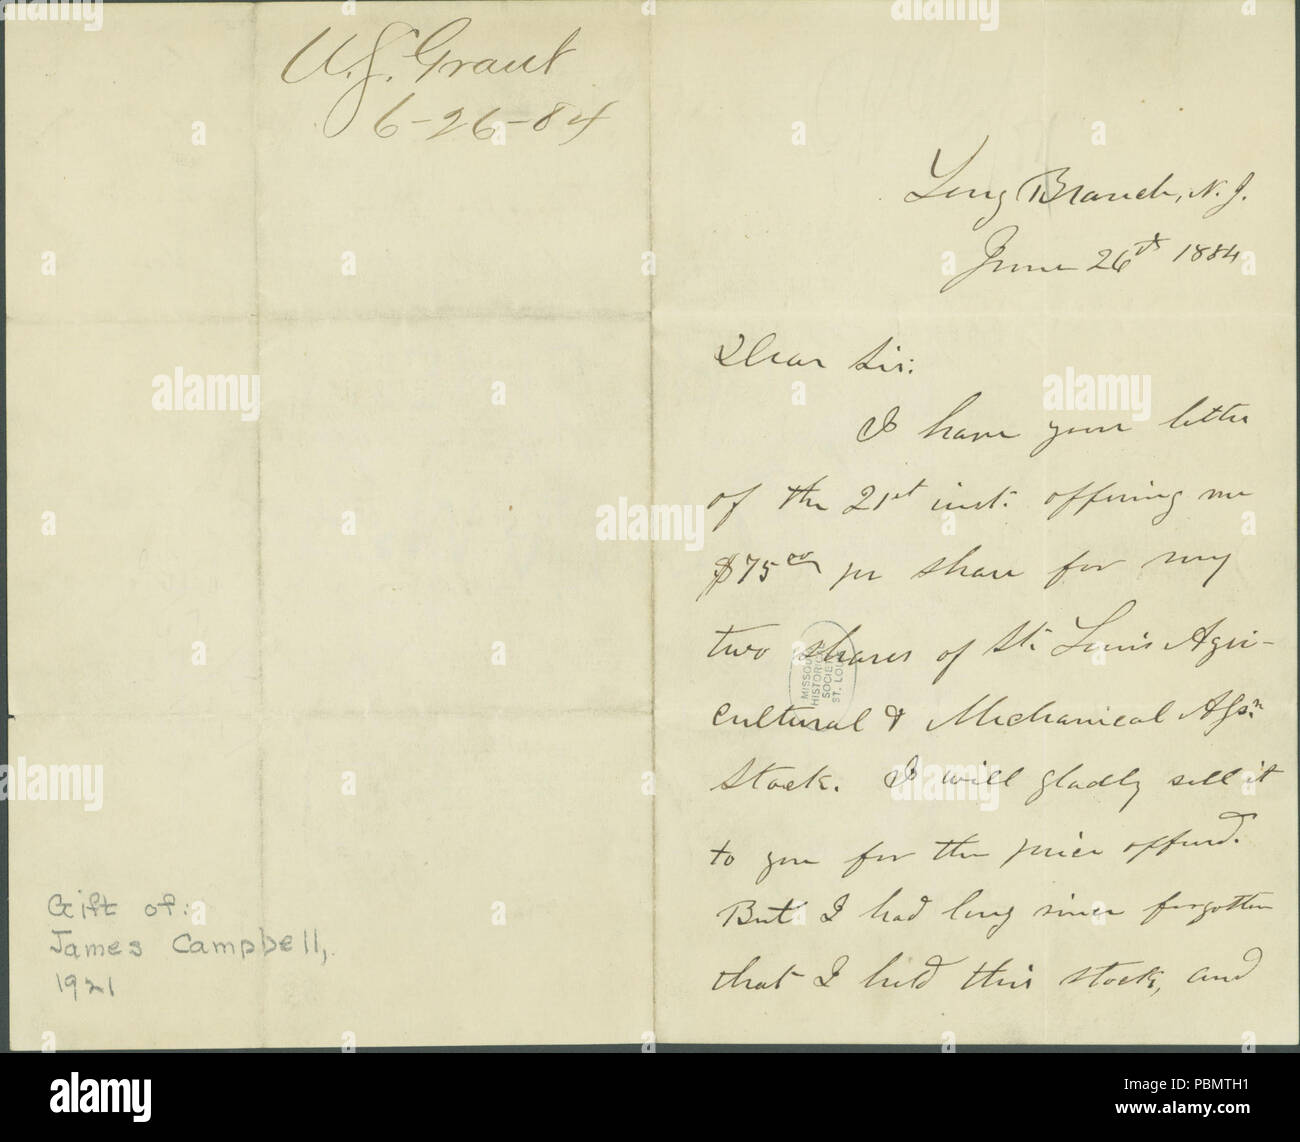 913 Letter signed U.S. Grant, Long Branch, N.J., to James Campbell, St. Louis, Mo., June 26, 1884 Stock Photo